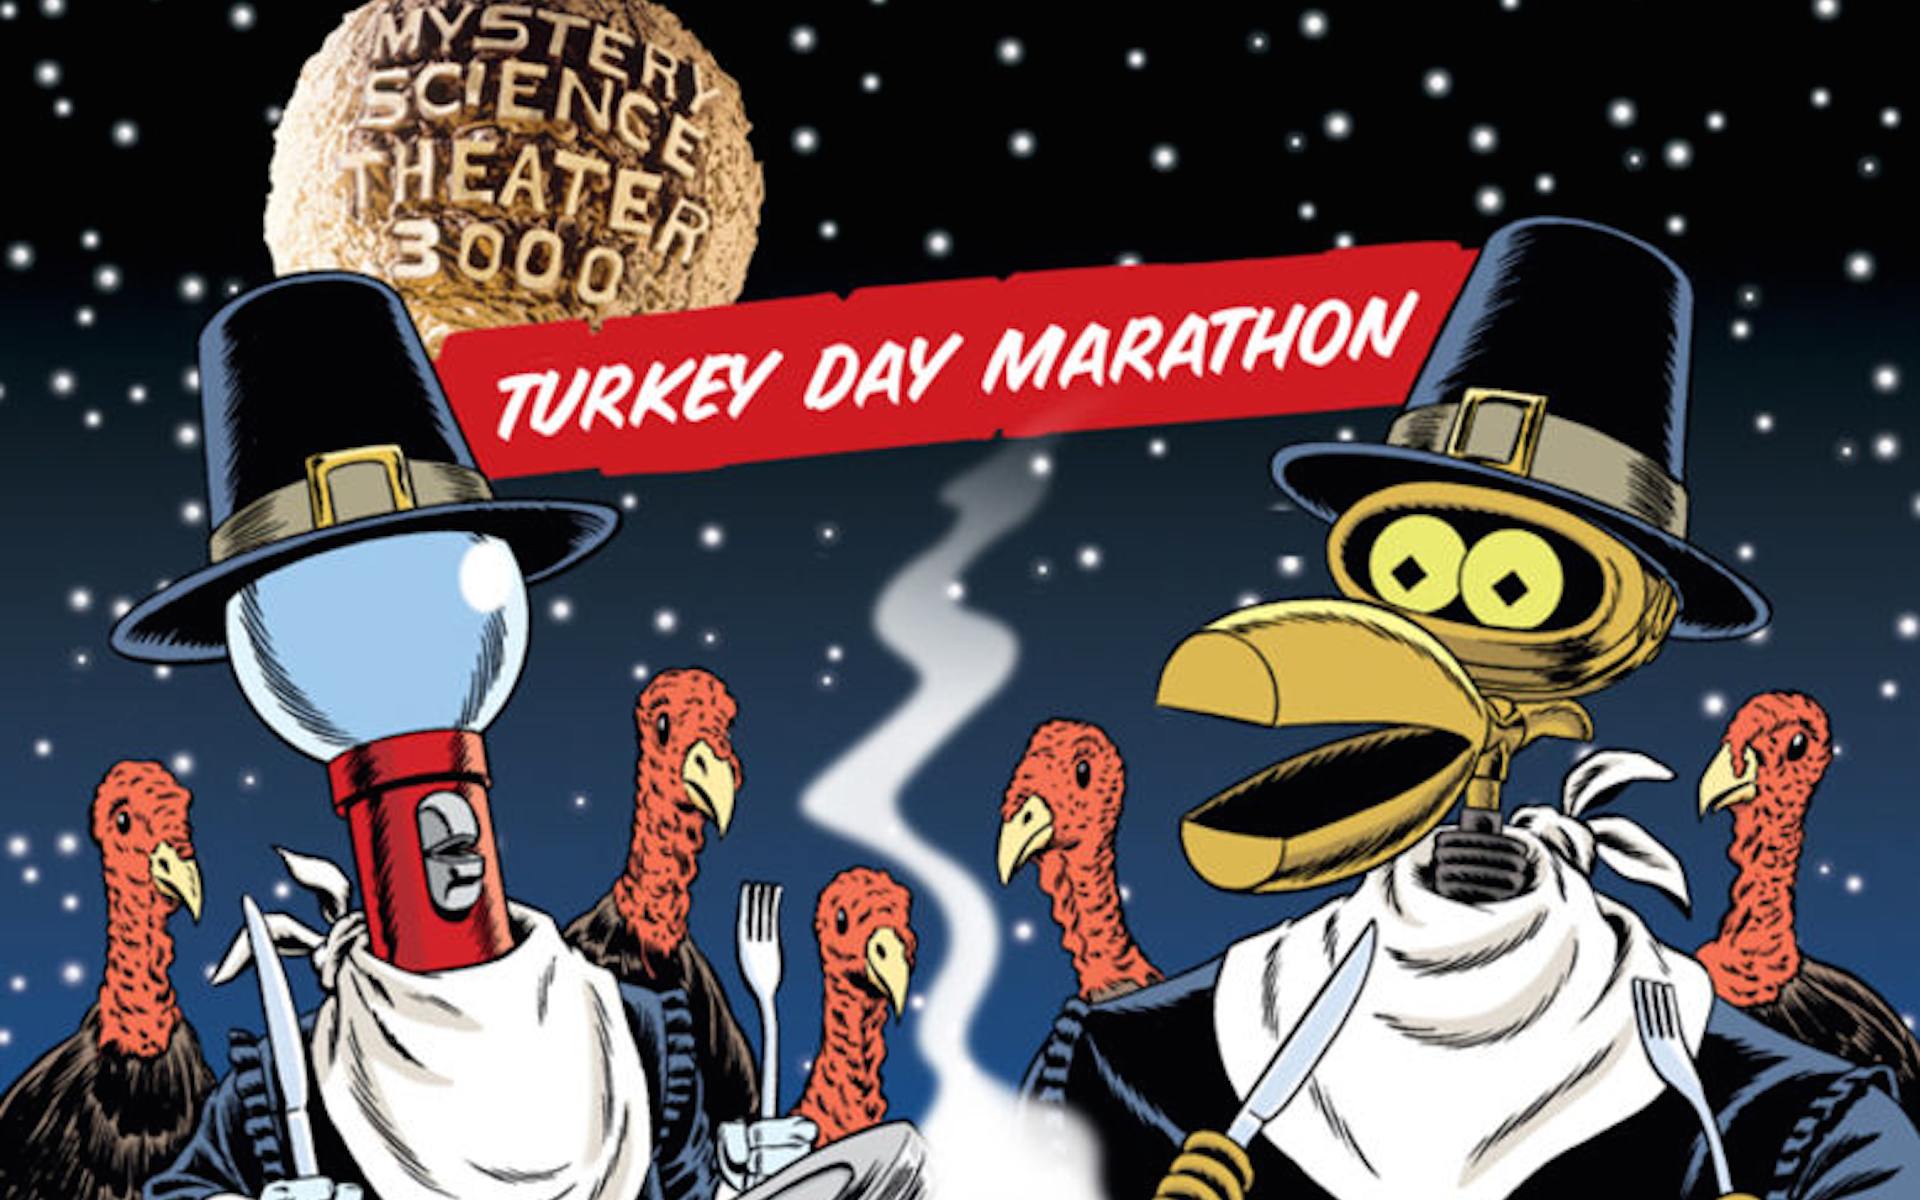 'Mystery Science Theater 3000' is bringing back their Turkey Day